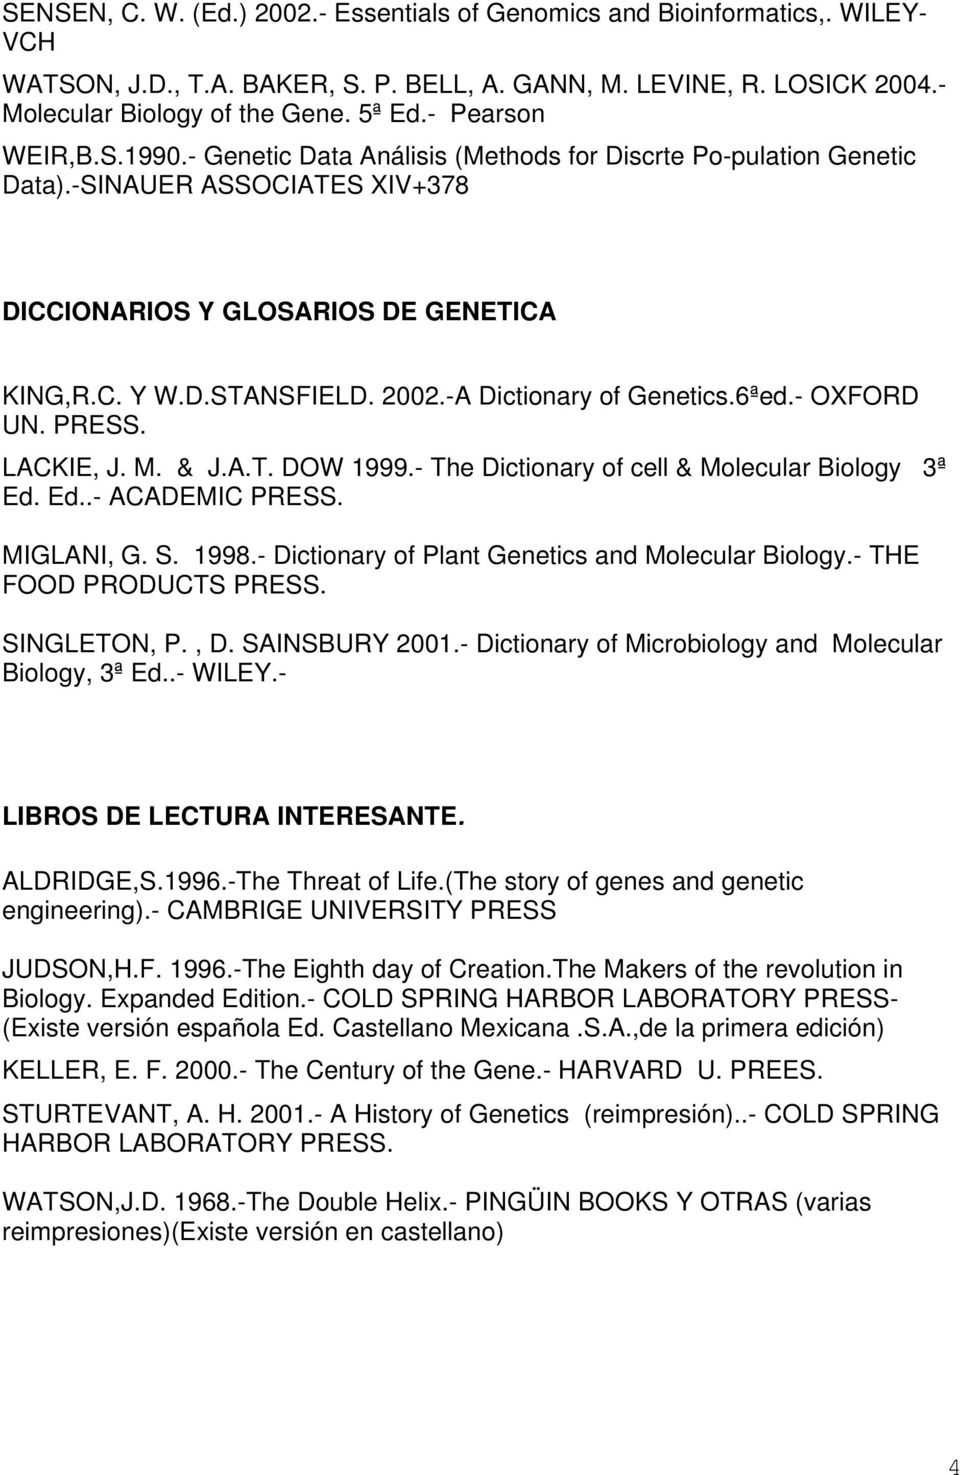 -A Dictionary of Genetics.6ªed.- OXFORD UN. PRESS. LACKIE, J. M. & J.A.T. DOW 1999.- The Dictionary of cell & Molecular Biology 3ª Ed. Ed..- ACADEMIC PRESS. MIGLANI, G. S. 1998.